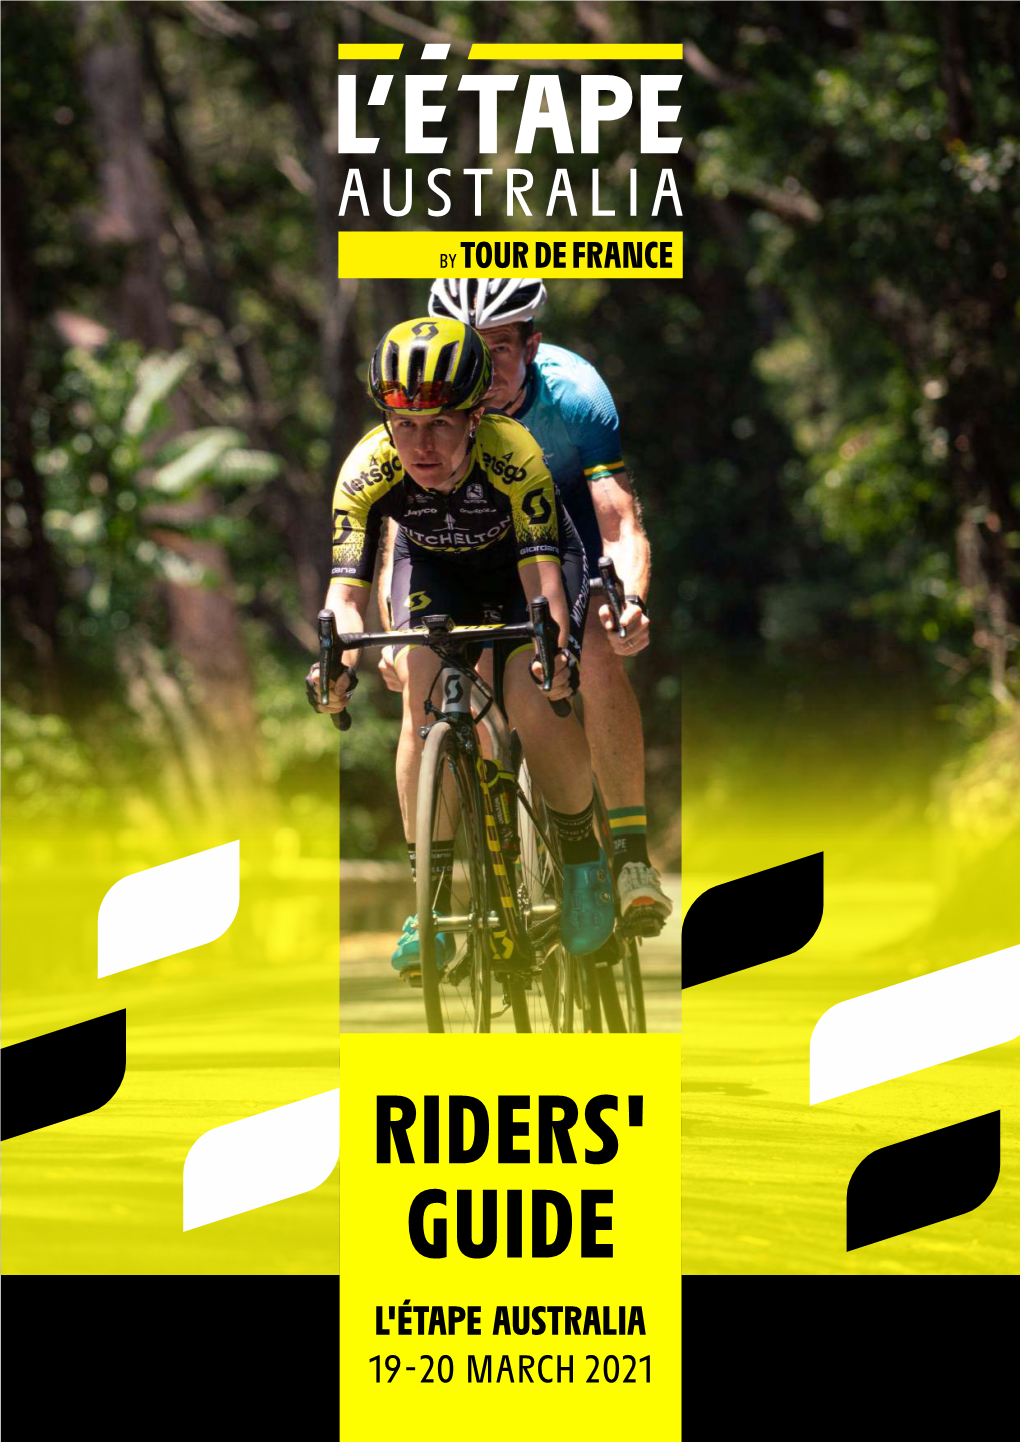 Download the Riders' Guide